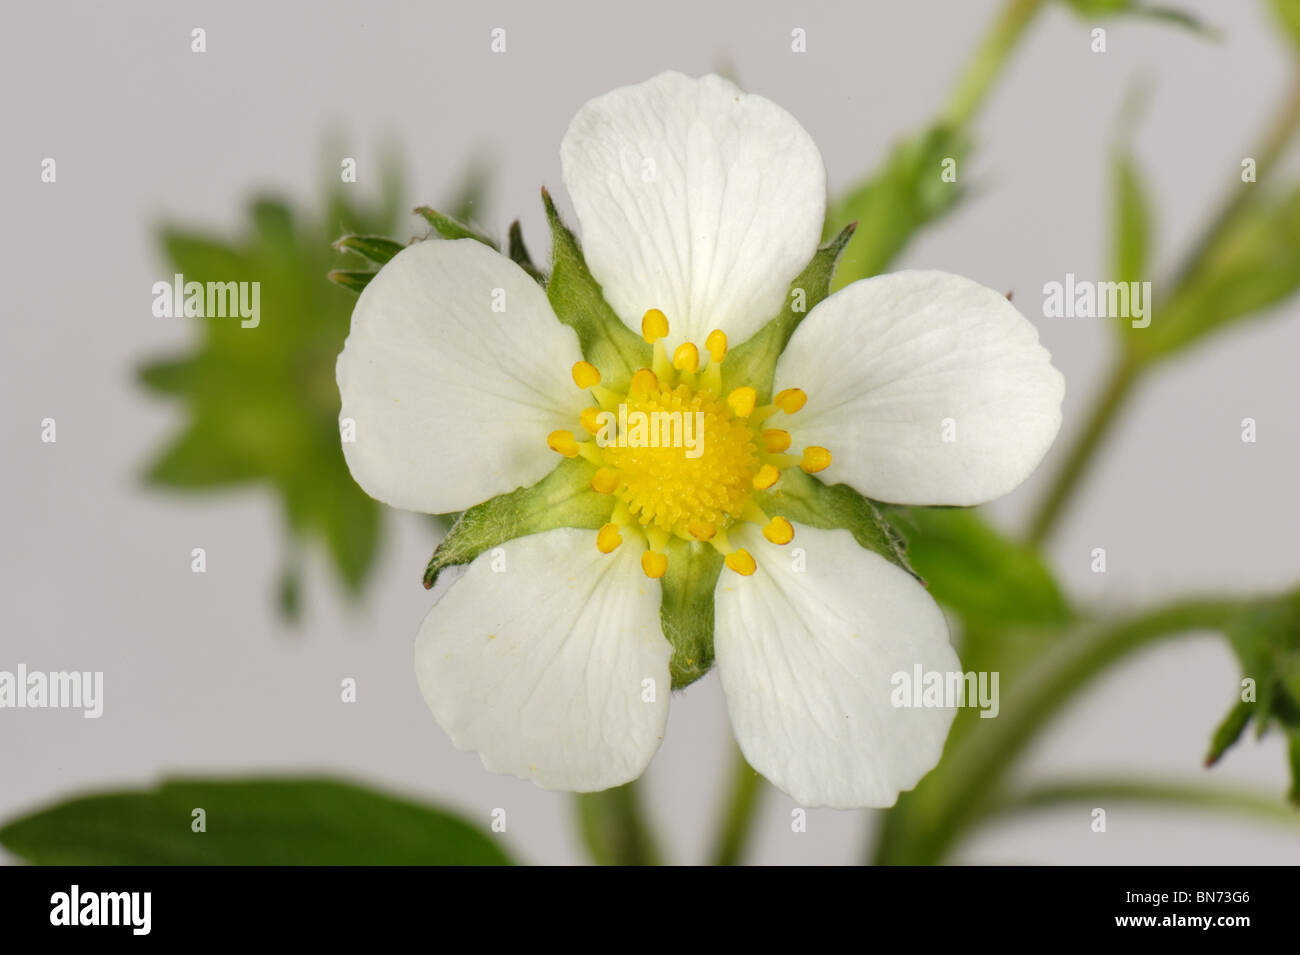 Wild strawberry (Fragaria vesca) flower showing petals, calyx and leaves on a white background Stock Photo